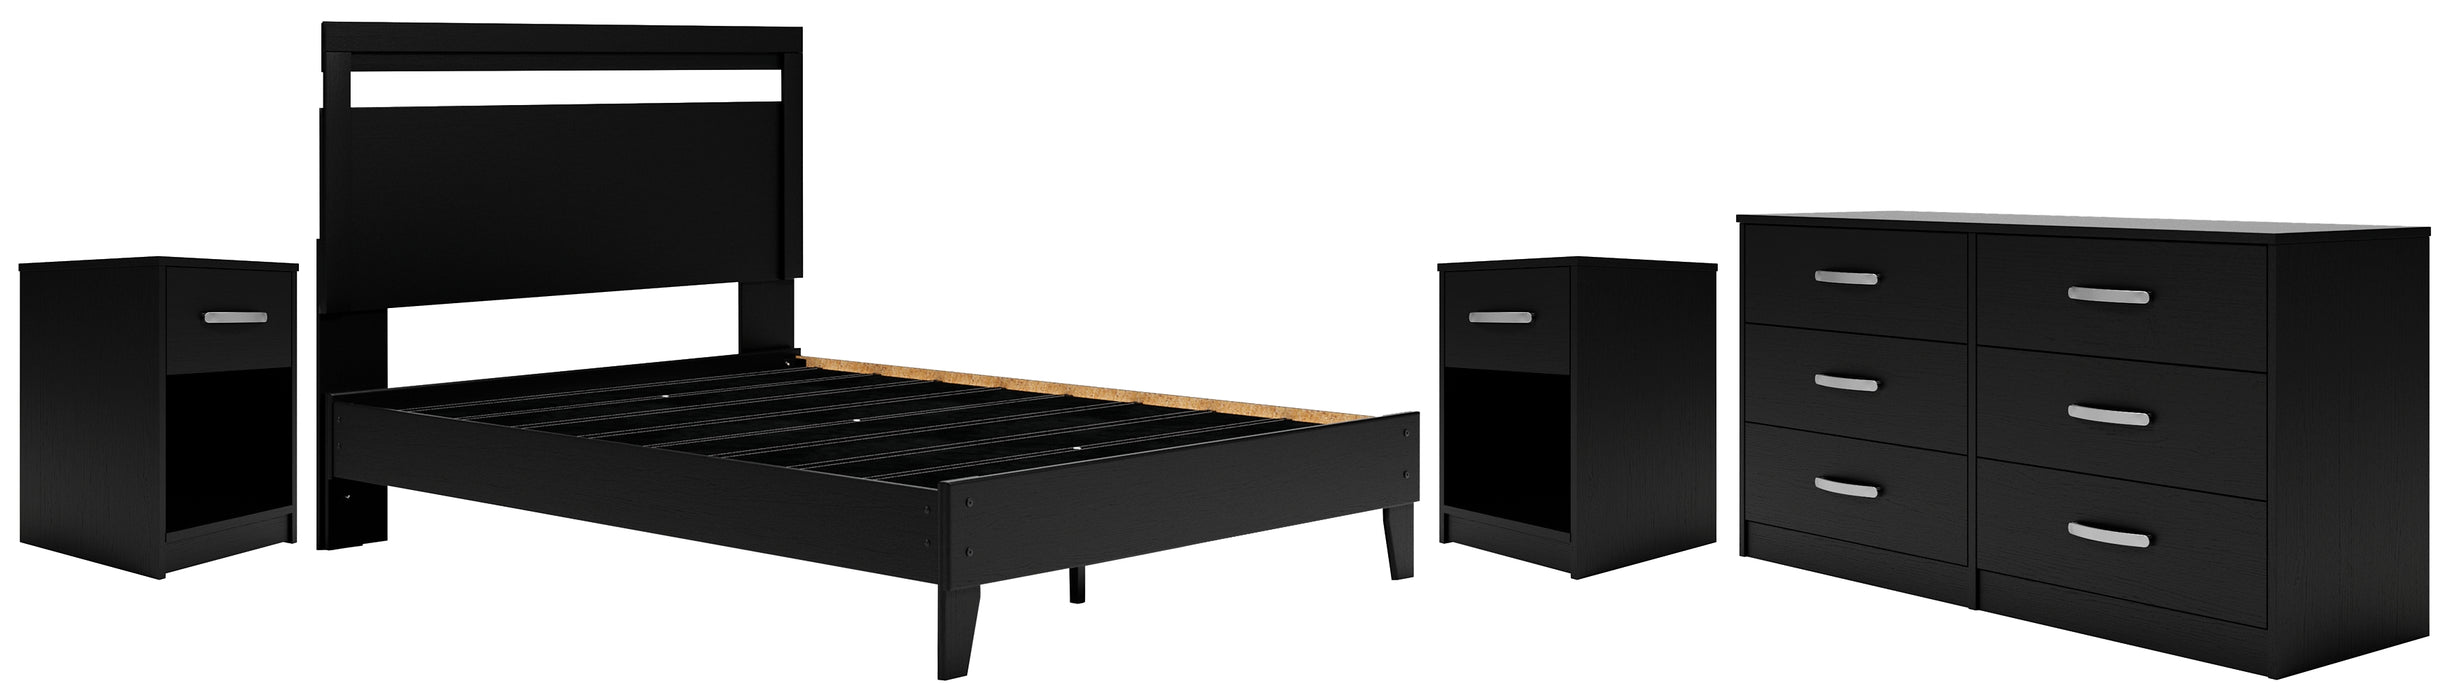 Ashley Express - Finch Queen Panel Platform Bed with Dresser and 2 Nightstands